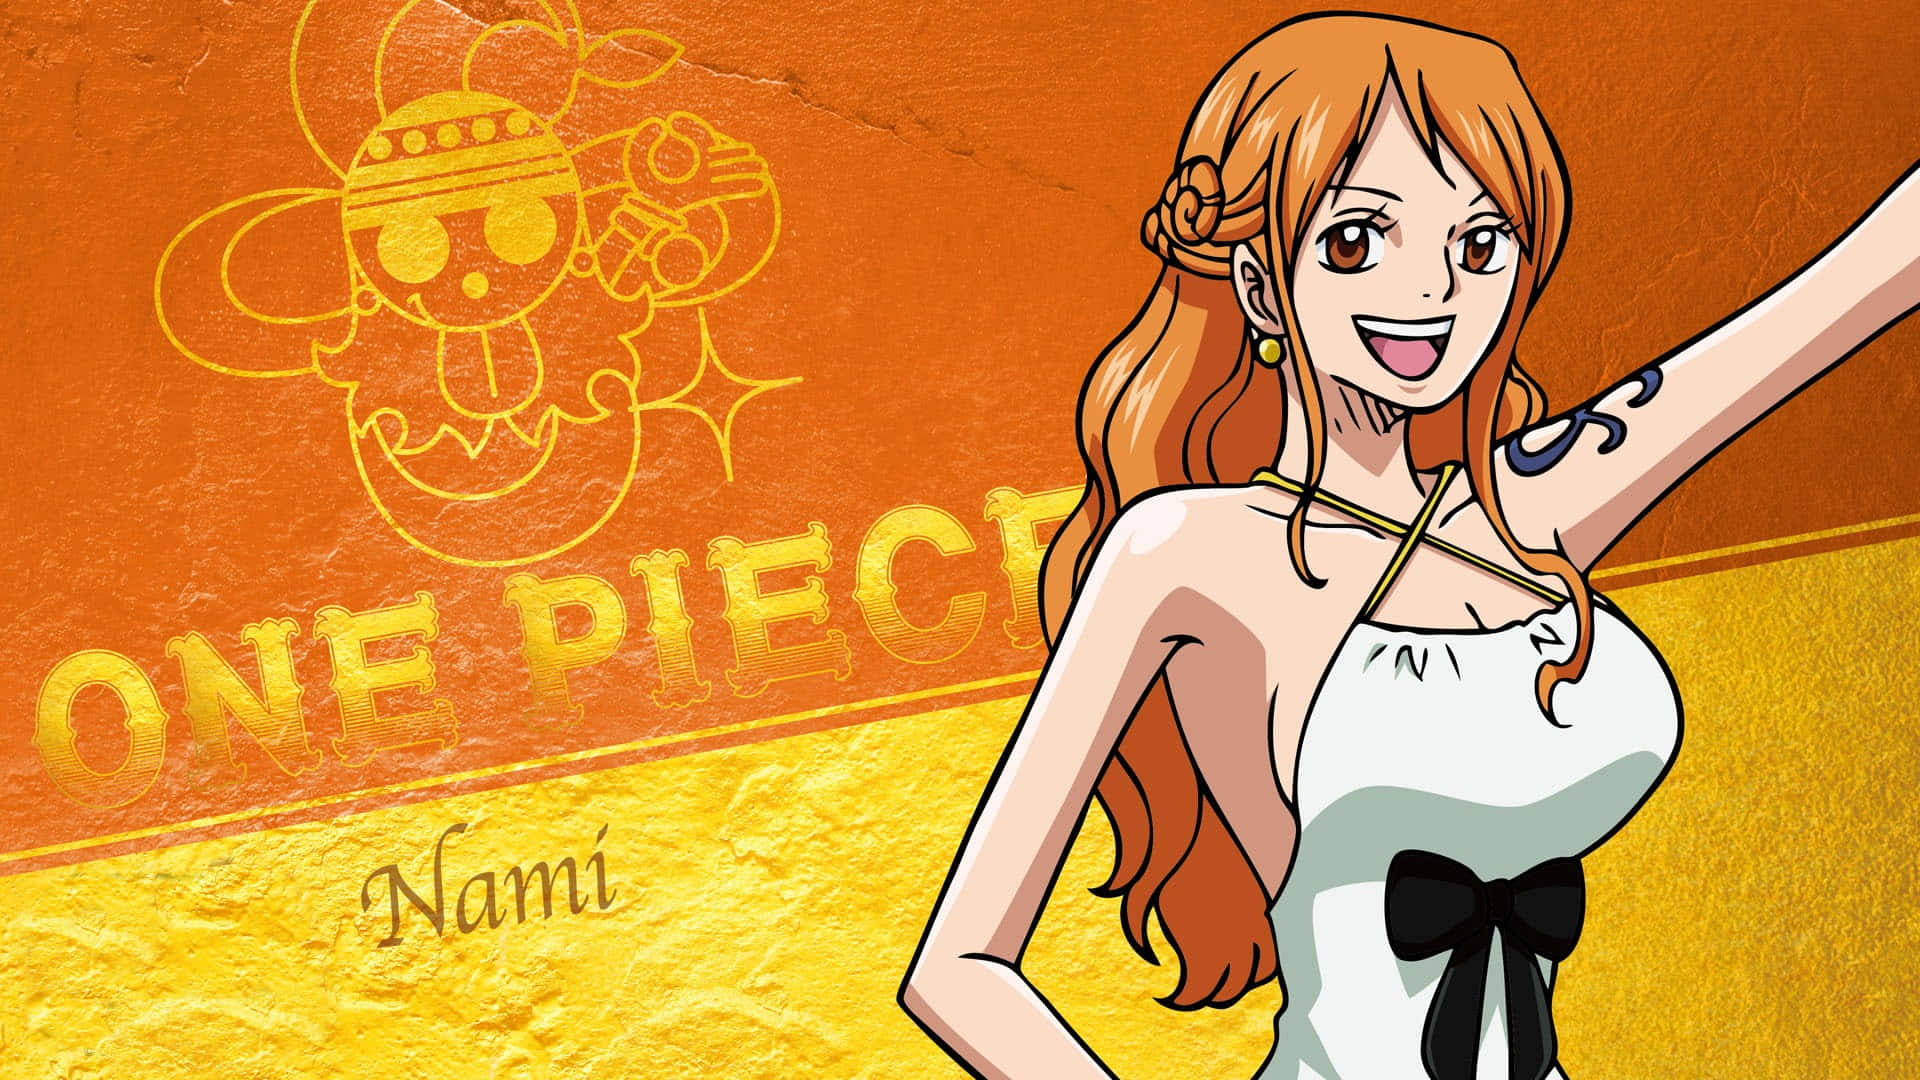 The Cunning and Intelligent Nami, One Piece's Navigator Wallpaper